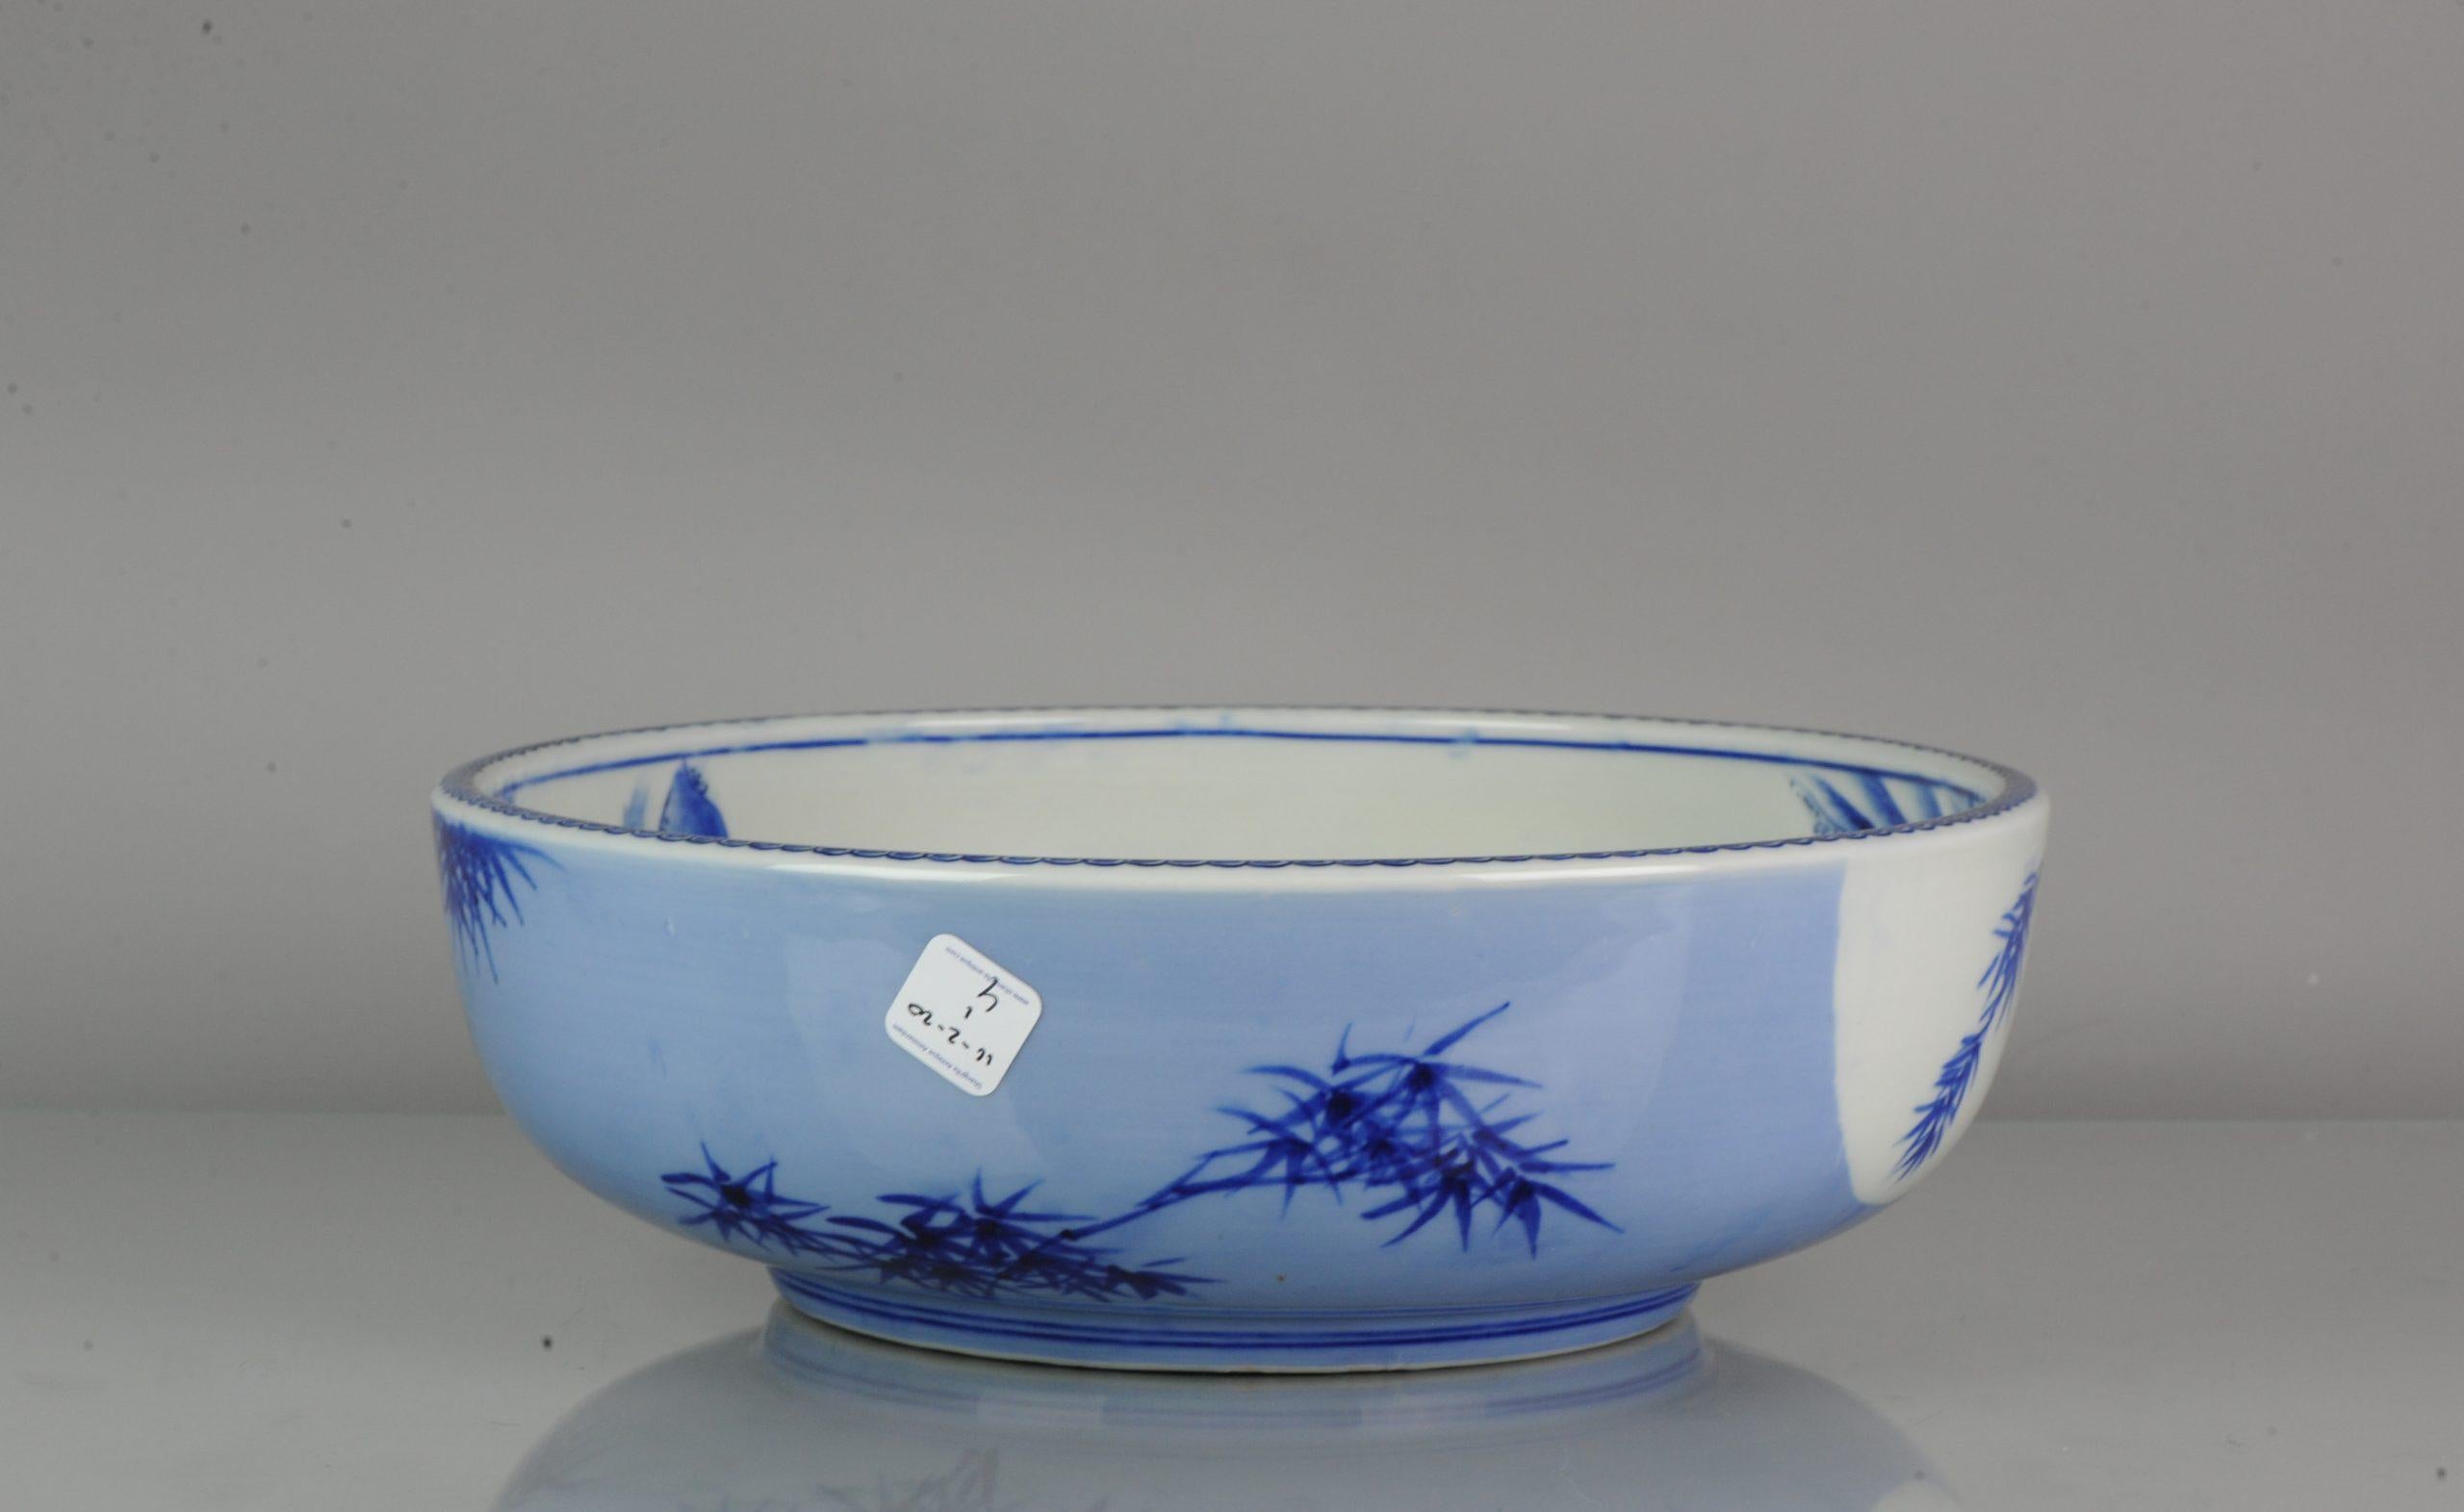 A very nice Arita Meiji bowl

 

11-2-20-1-4

 

 

 
Condition
Overall condition perfect. Size: 238mm
Period
18th century.